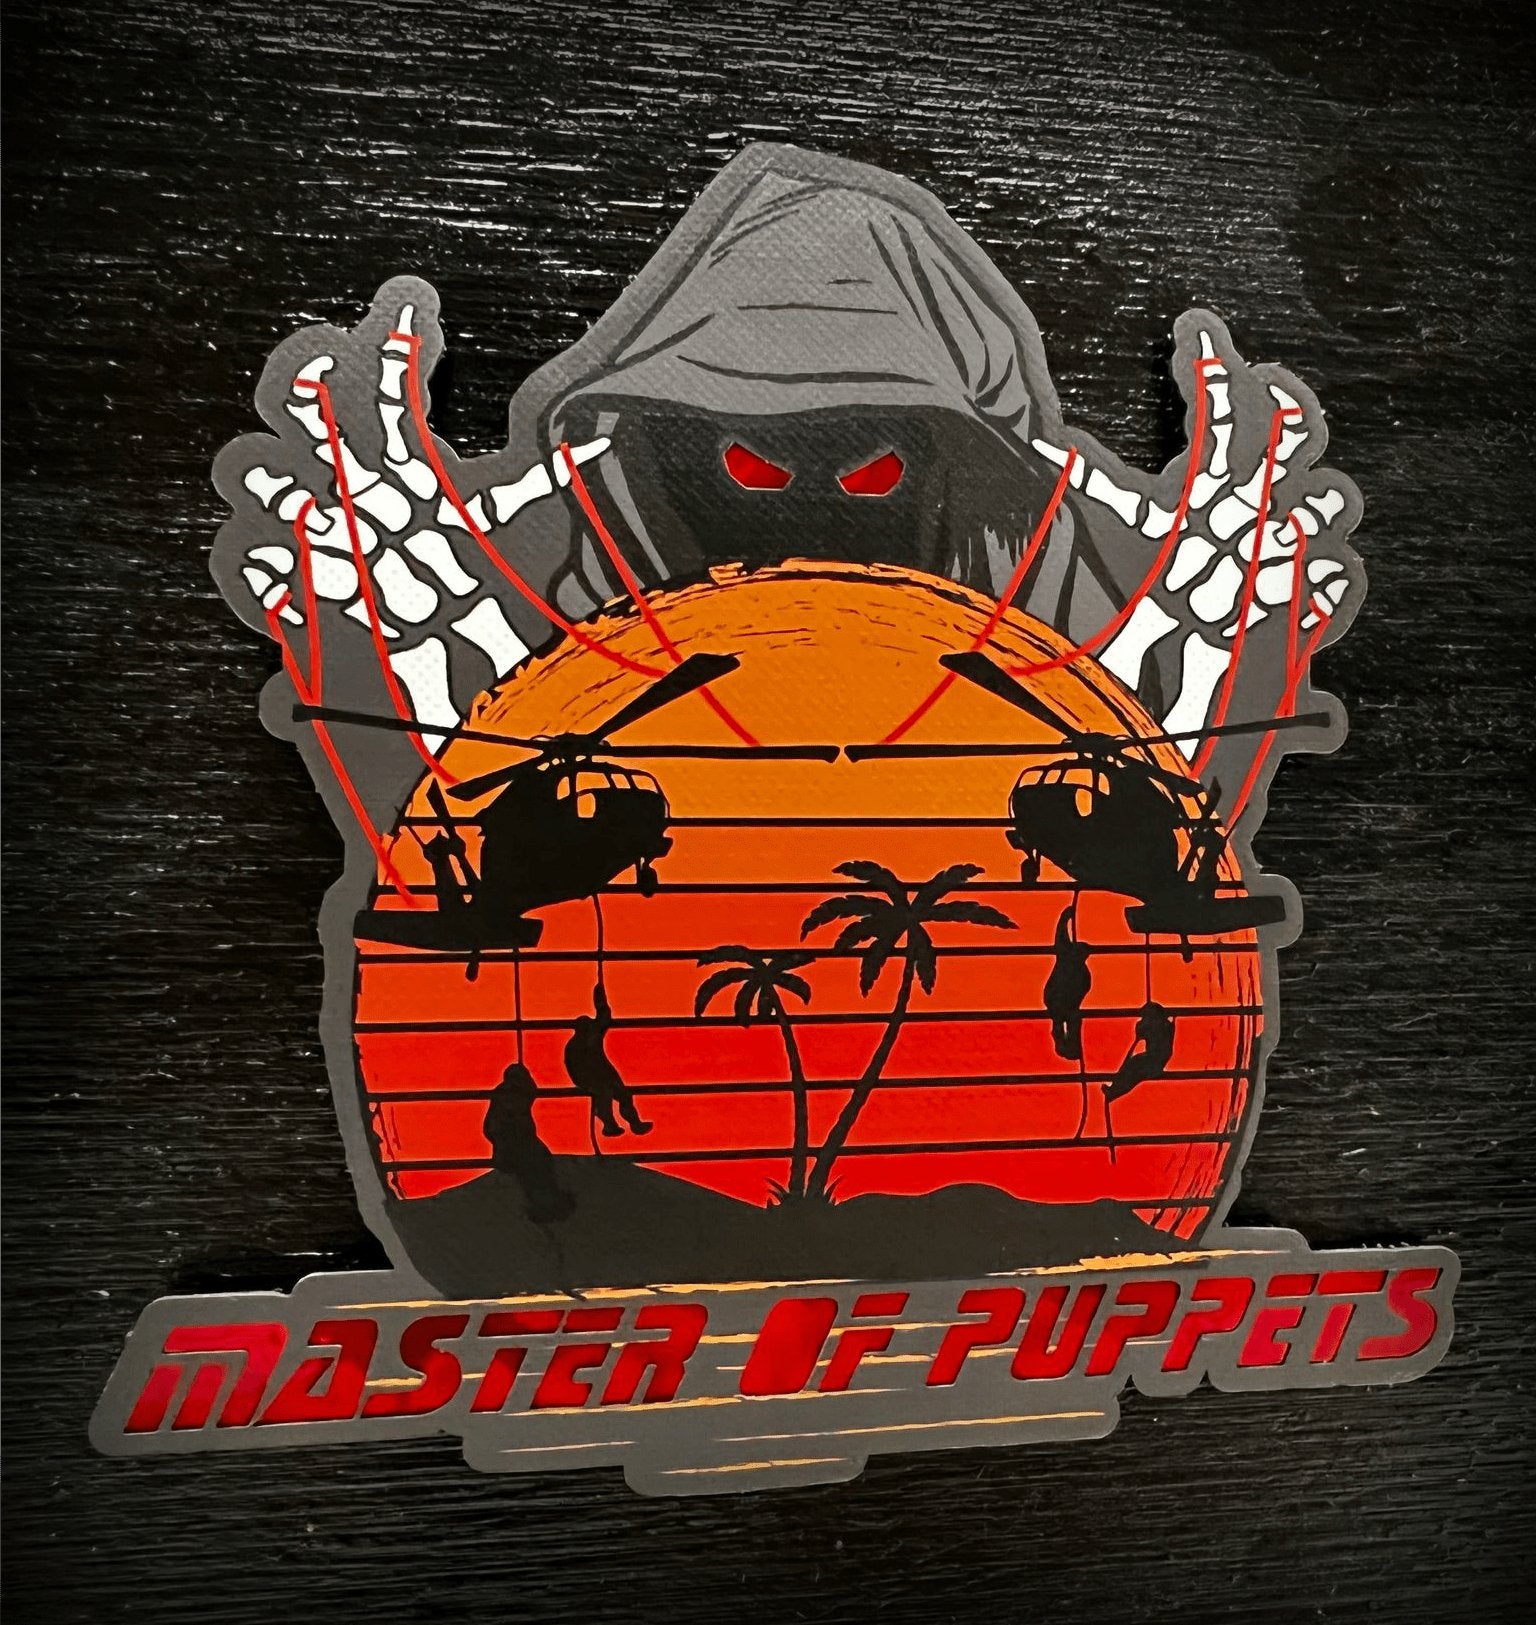 Tactical Gear Junkie Patches Master Of Puppets - Printed Vinyl Patch